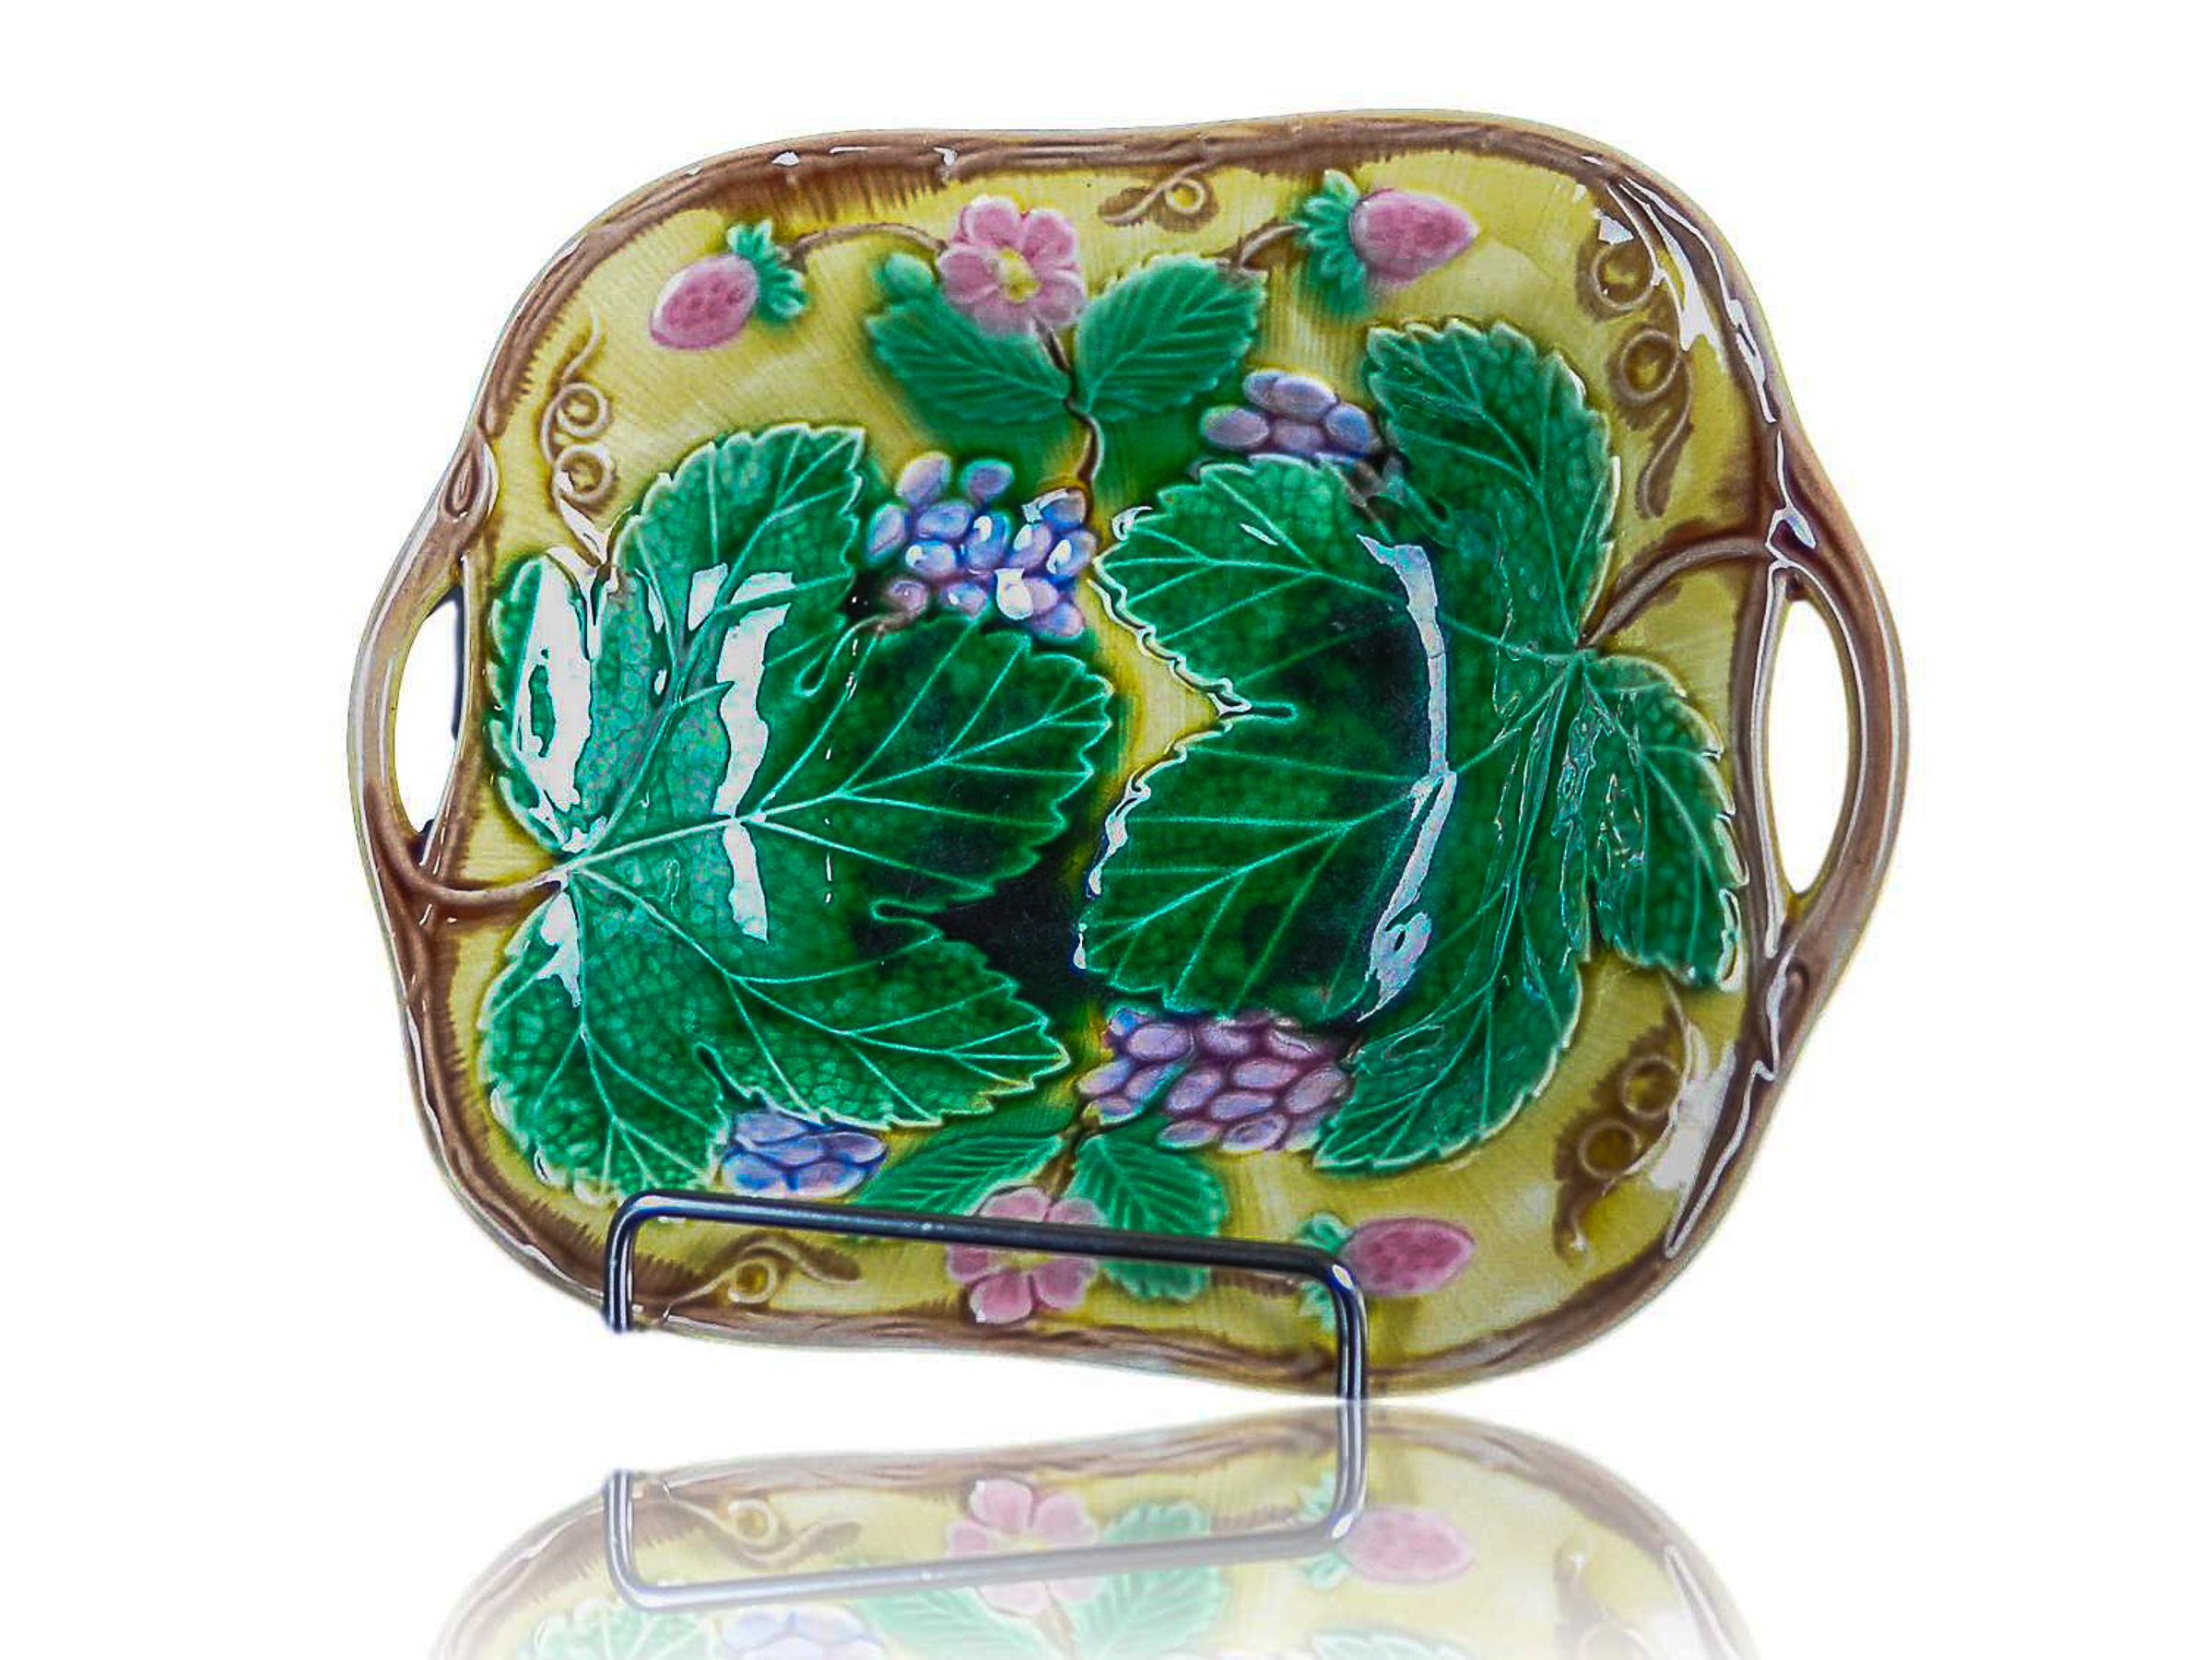 Wedgwood Majolica 'Vine & Strawberry' Dish, English, Dated 1940, with a large central green grape leaf, purple grapes, reddish pink strawberries and blossoms on a deep yellow ground. Marks to reverse: 'WEDGWOOD' Seal and impressed with the